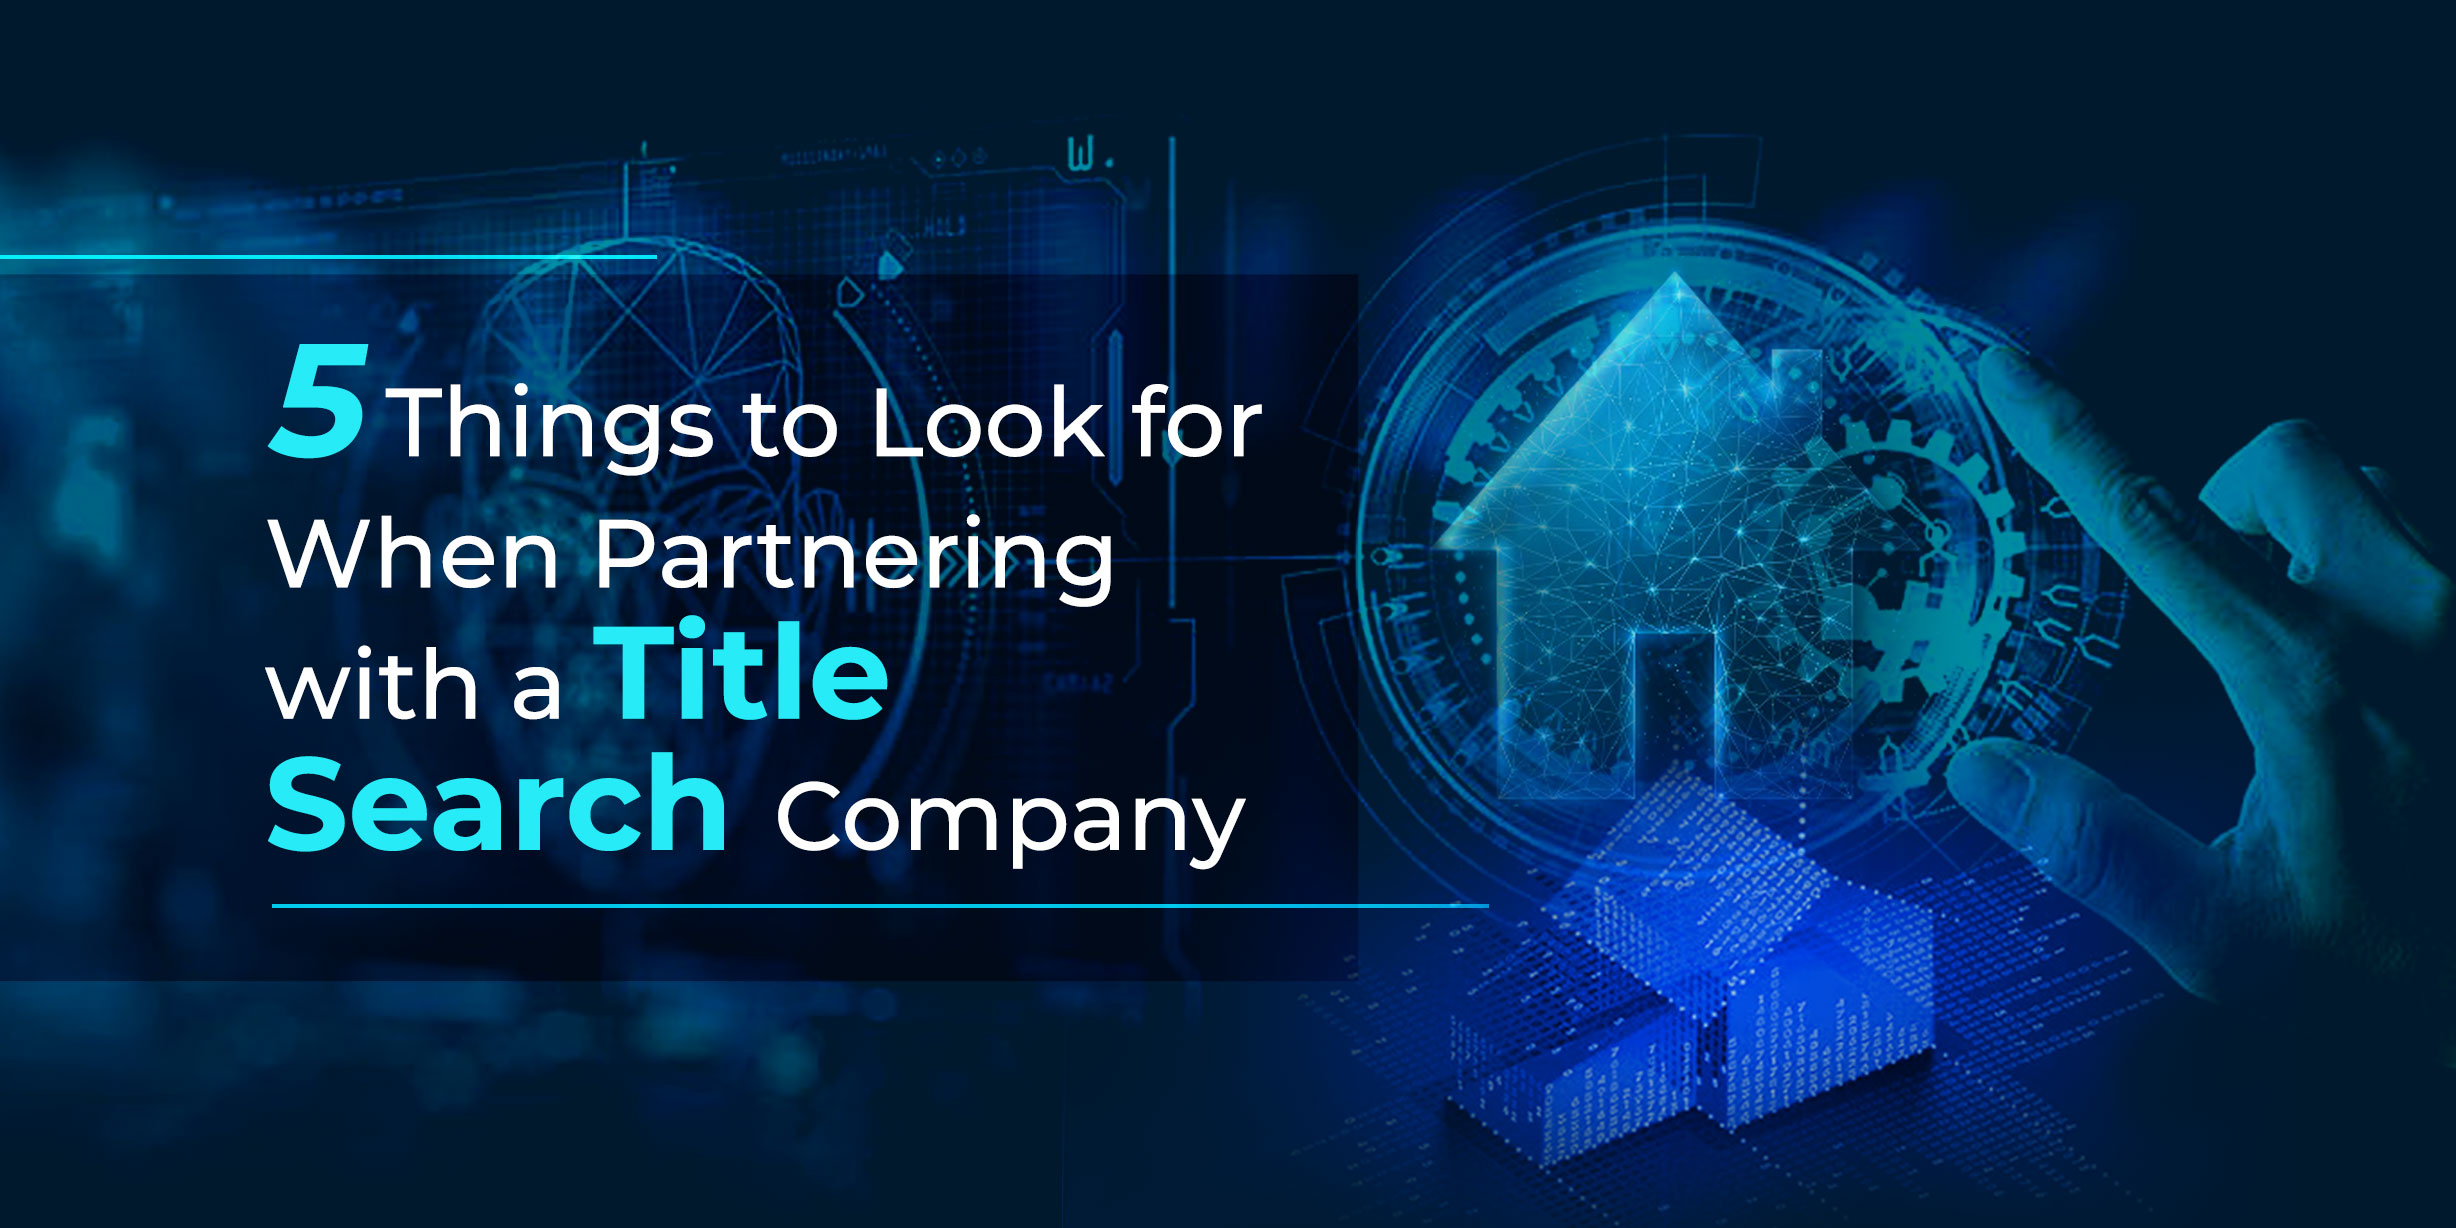 What to Look for When Partnering with a Title Search Company